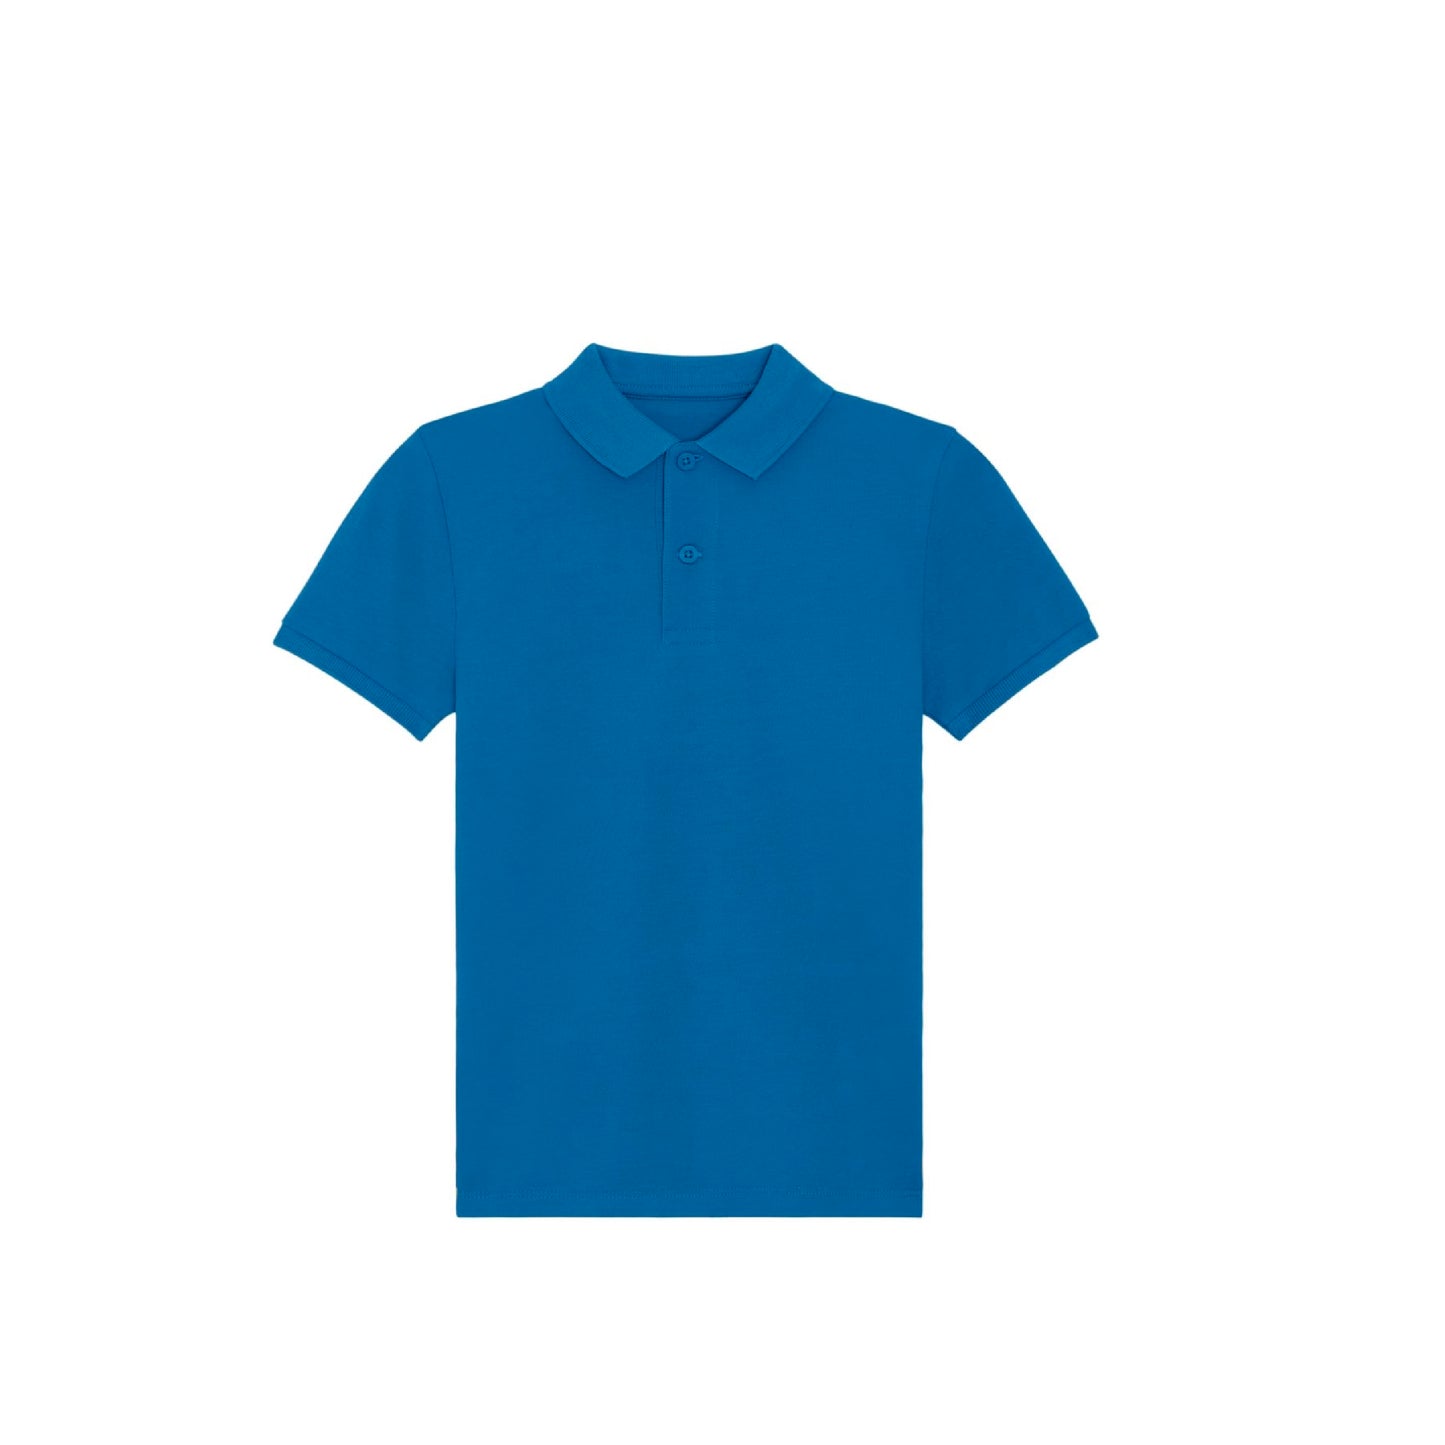 The Iconic Kids' Polo